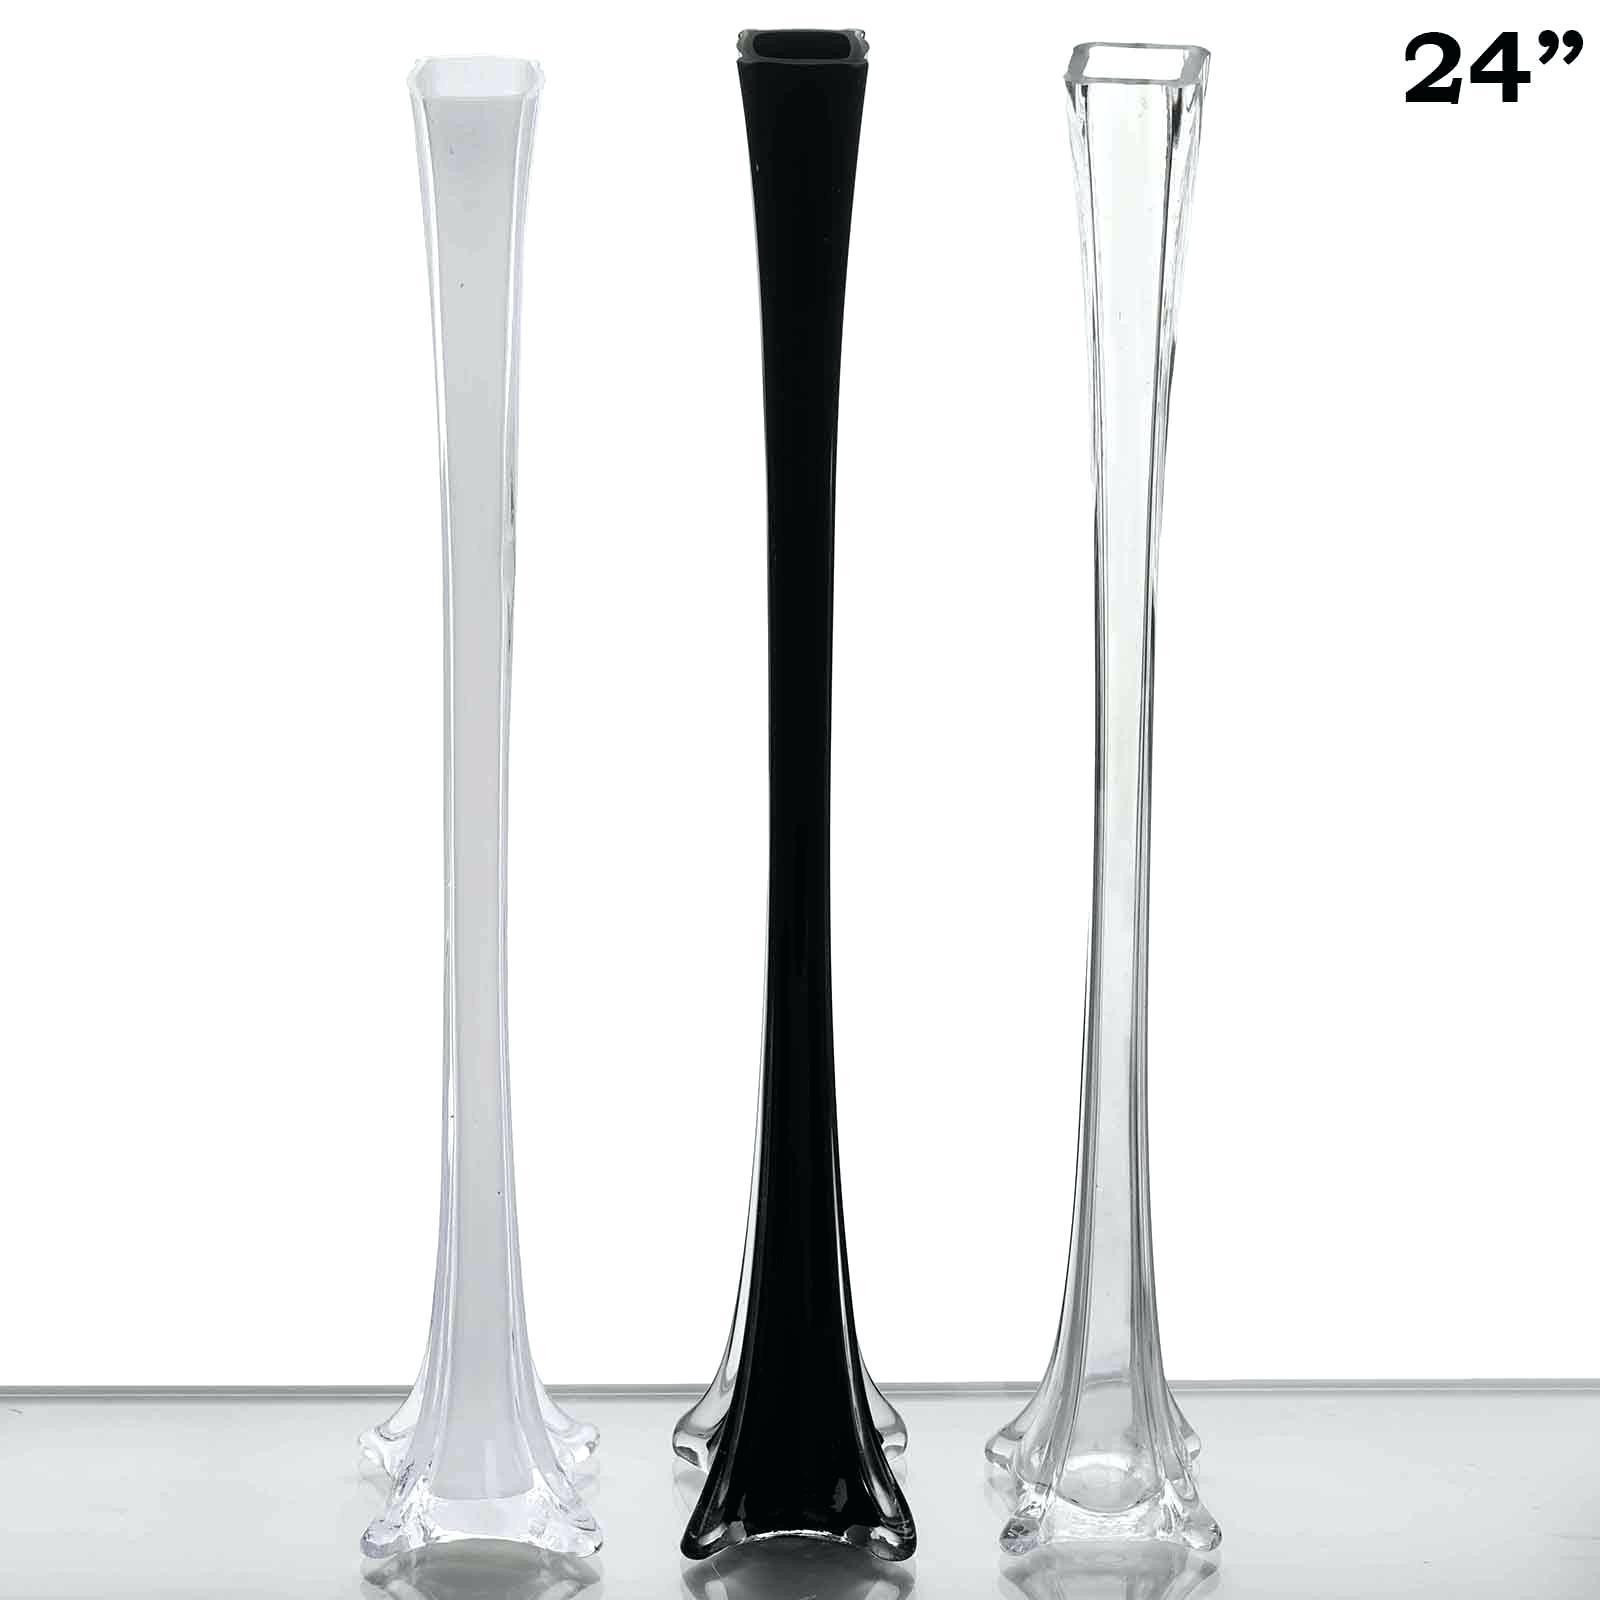 22 Ideal Glass Vase with Lid 2024 free download glass vase with lid of glass vases with lids image living room glass vases fresh clear vase pertaining to glass vases with lids images fantastic chair decor ideas from living room vases whol